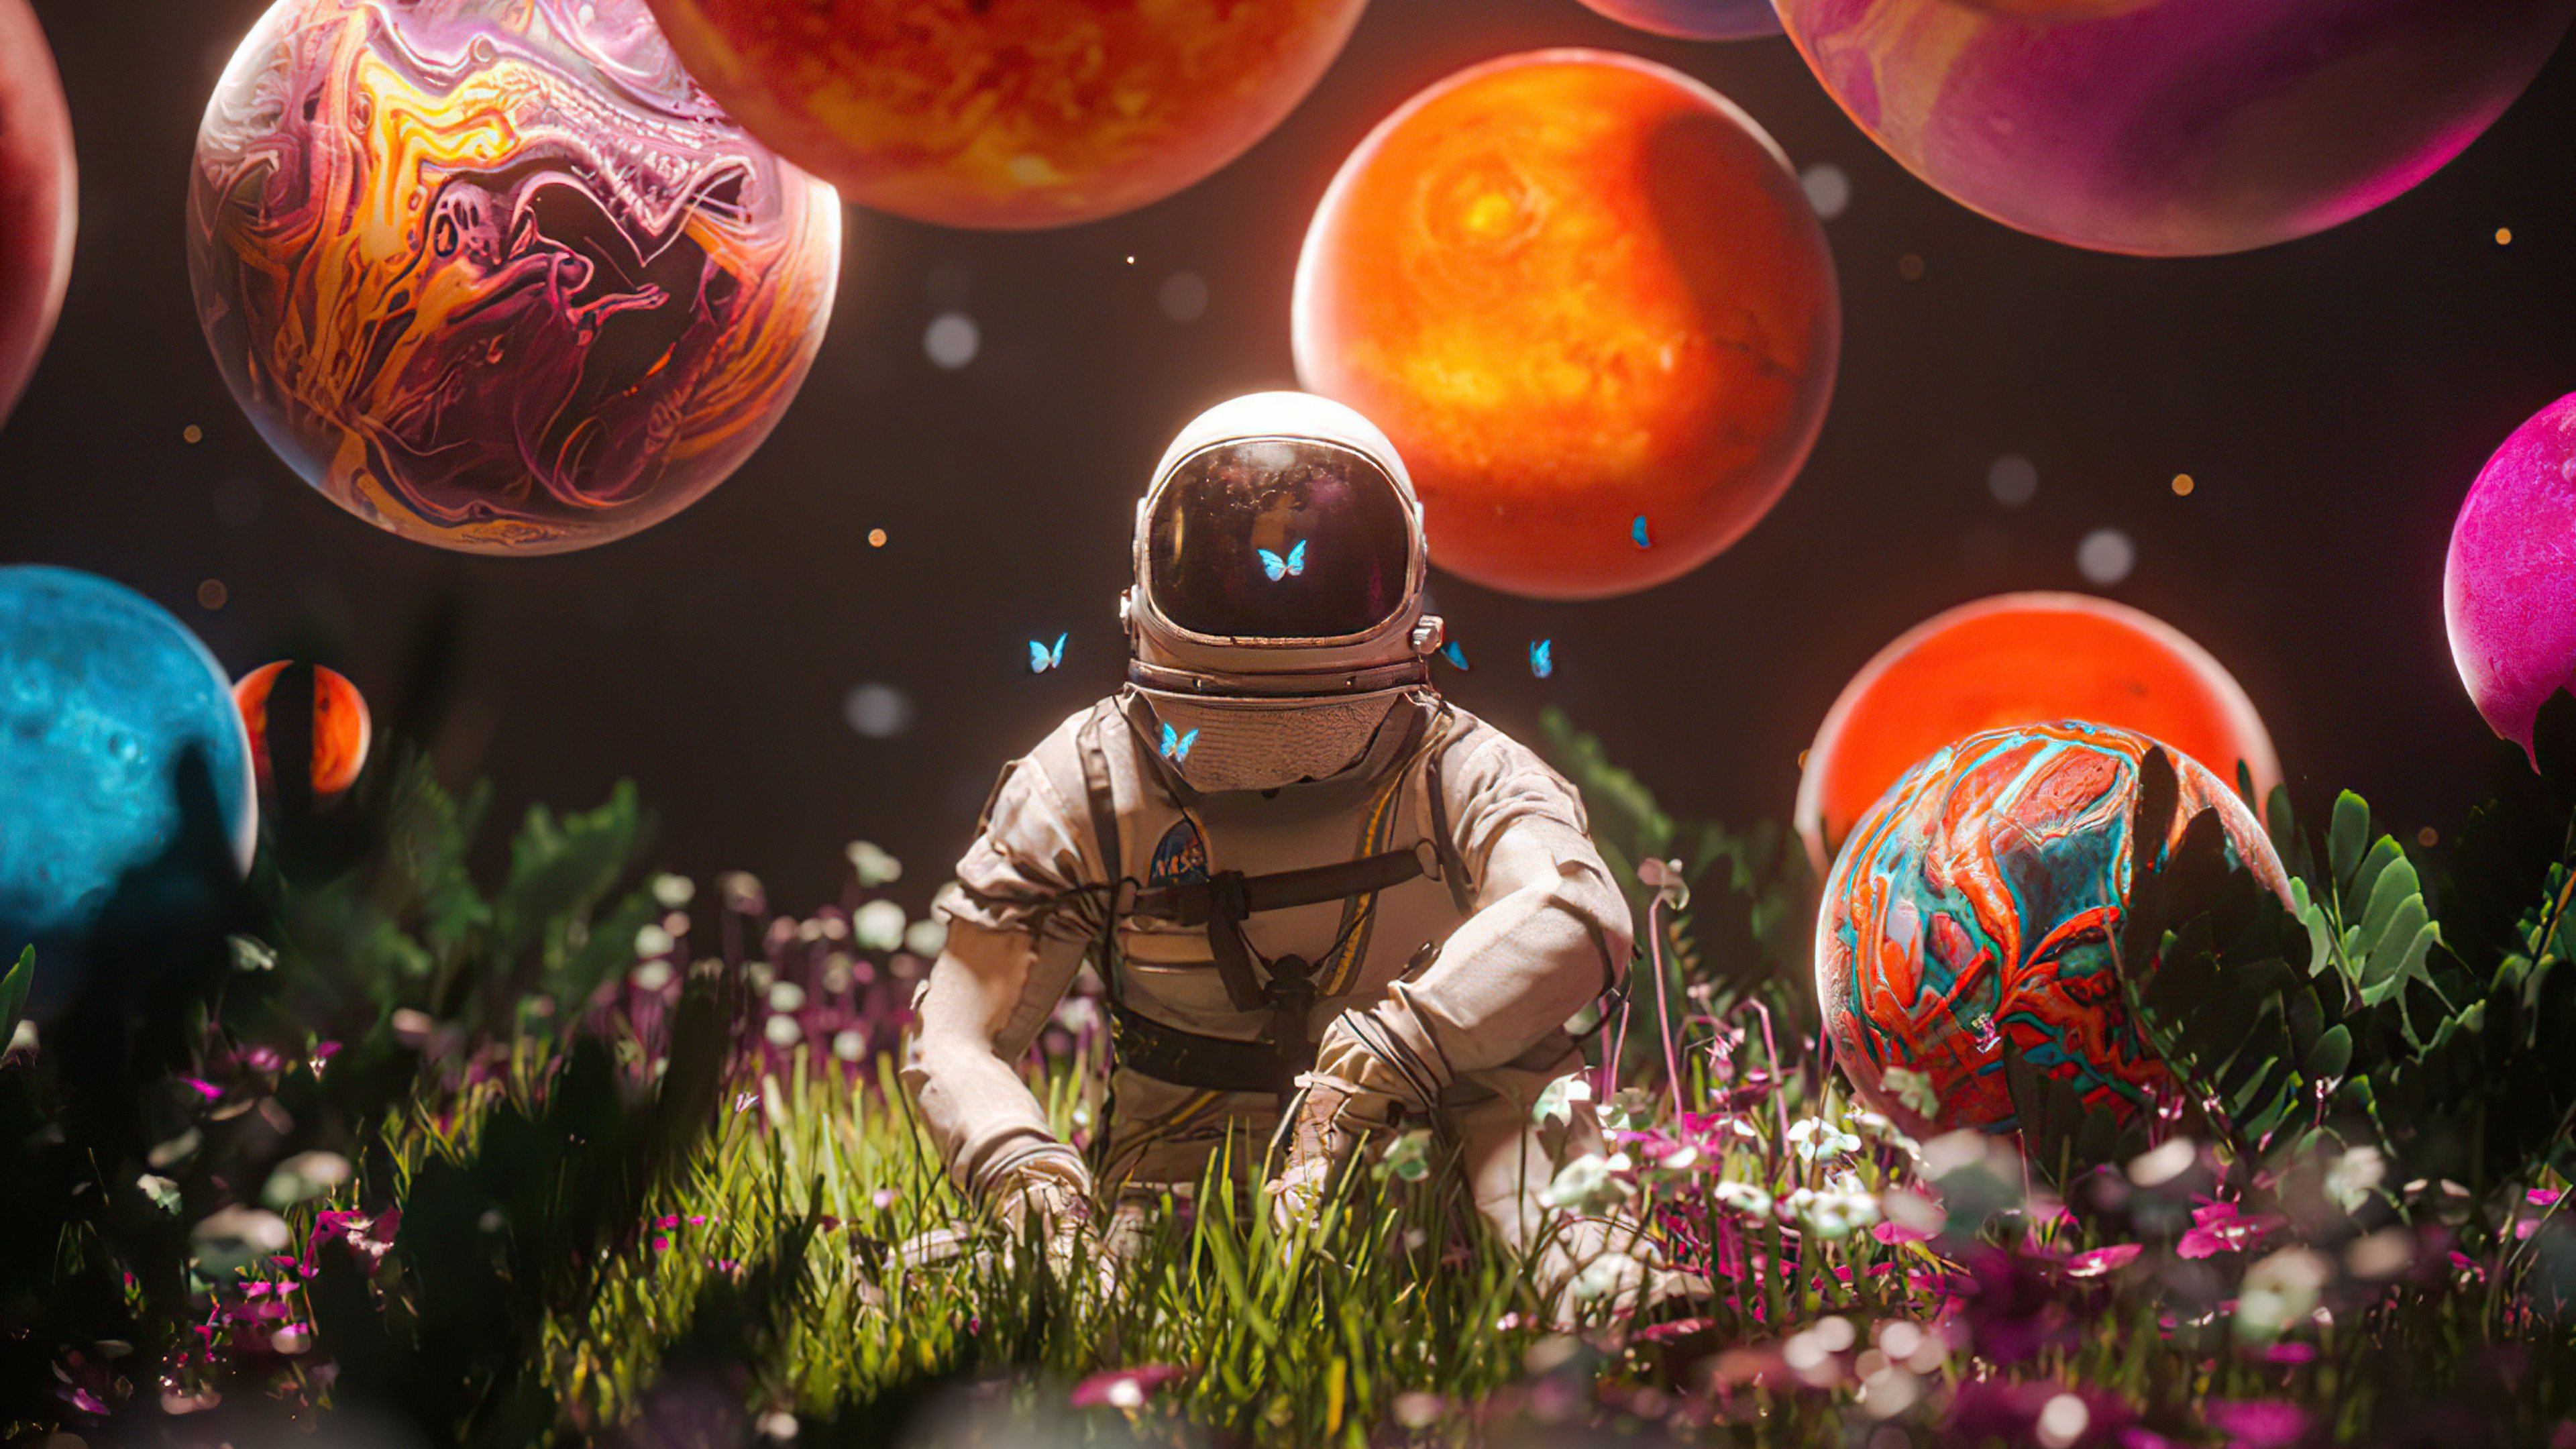 Wallpaper Astronaut with planets and flowers